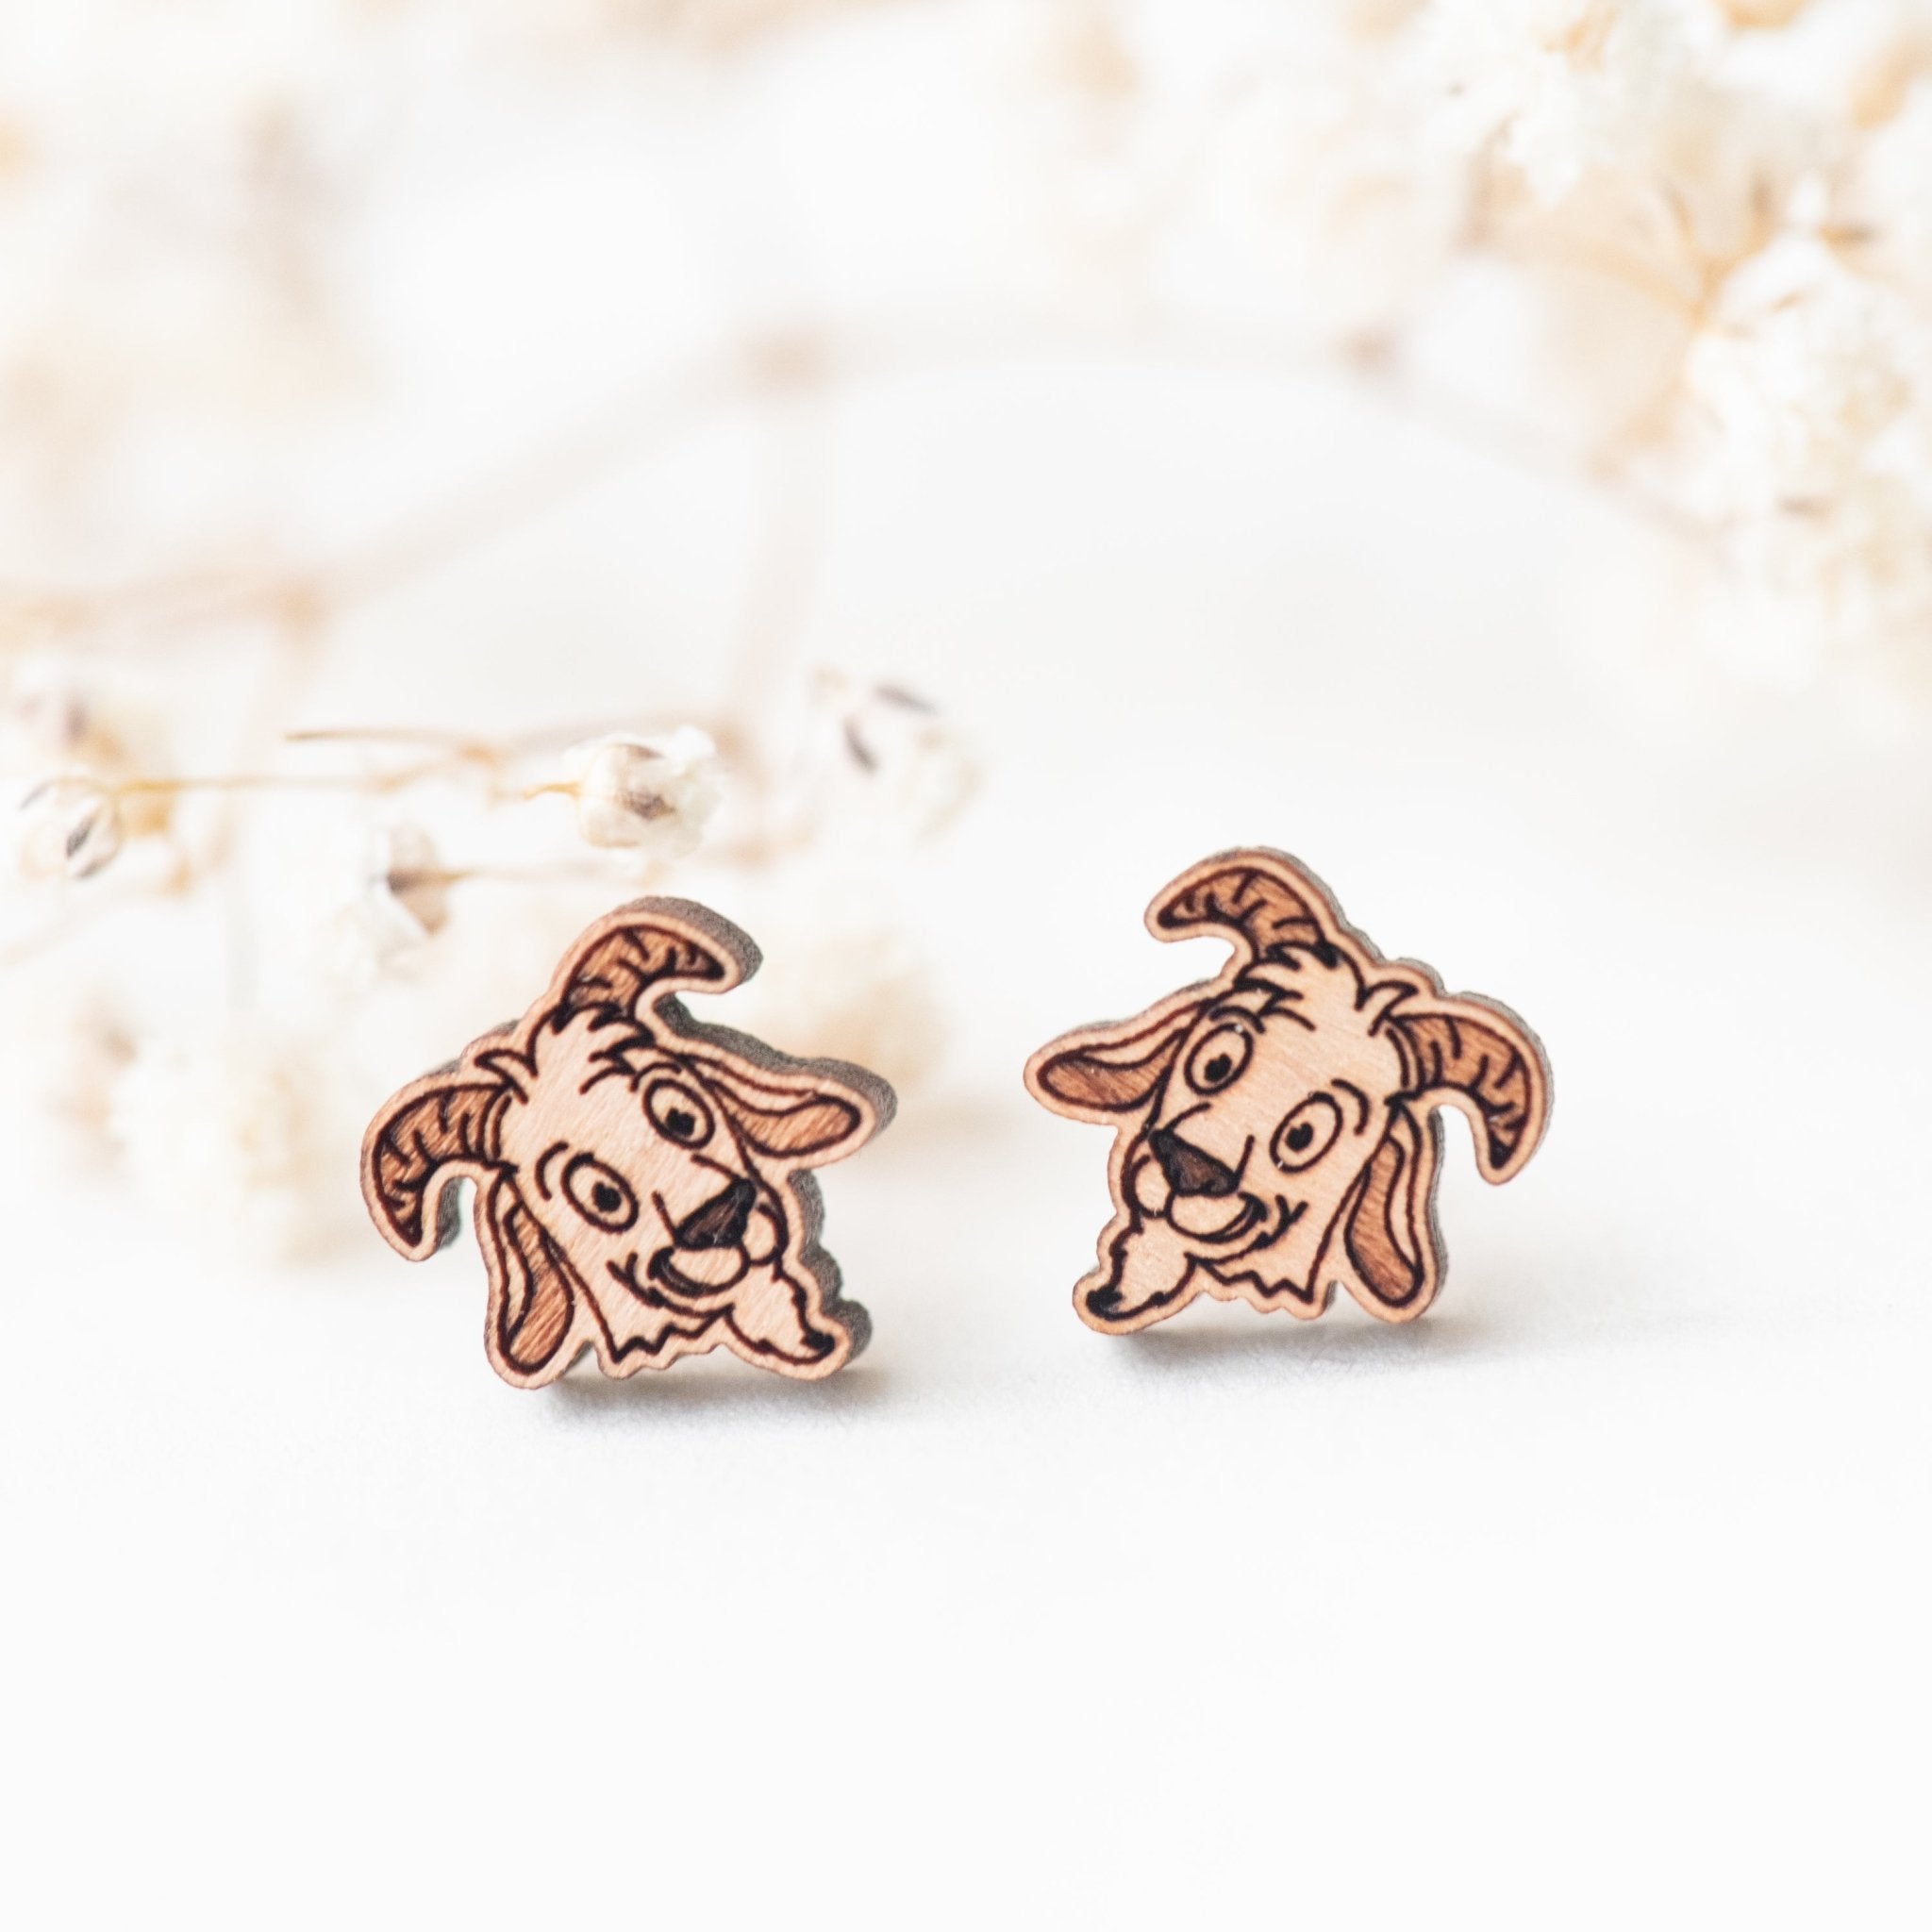 Billy Goat Cherry Wood Stud Earrings - EL10137 - Robin Valley Official Store